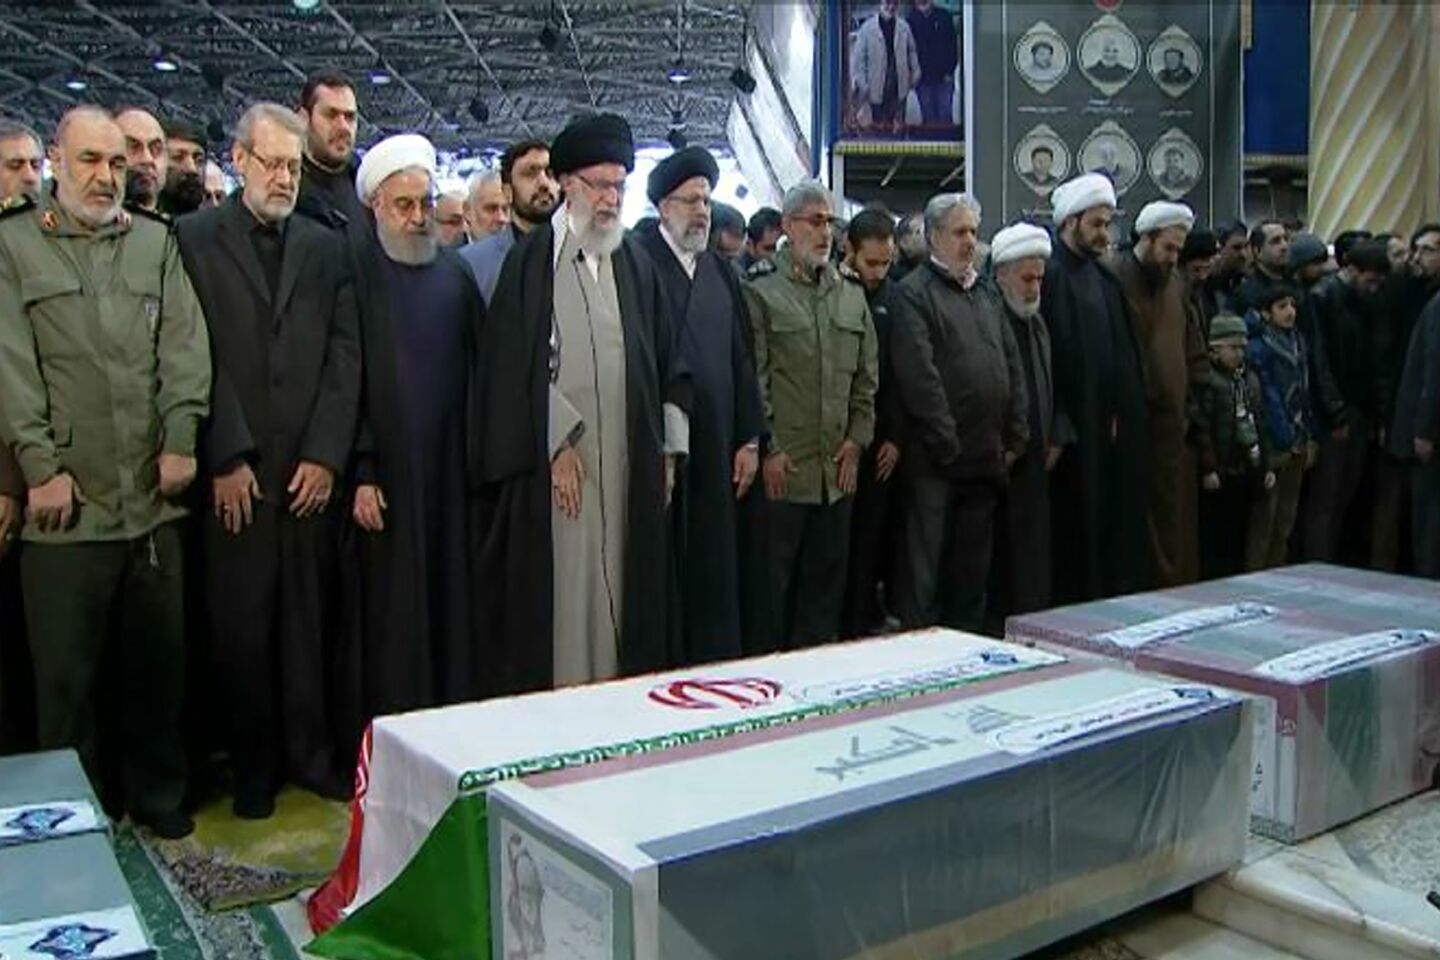 Ayatollah Ali Khamenei,, fourth from left, leads a prayer during the funeral.